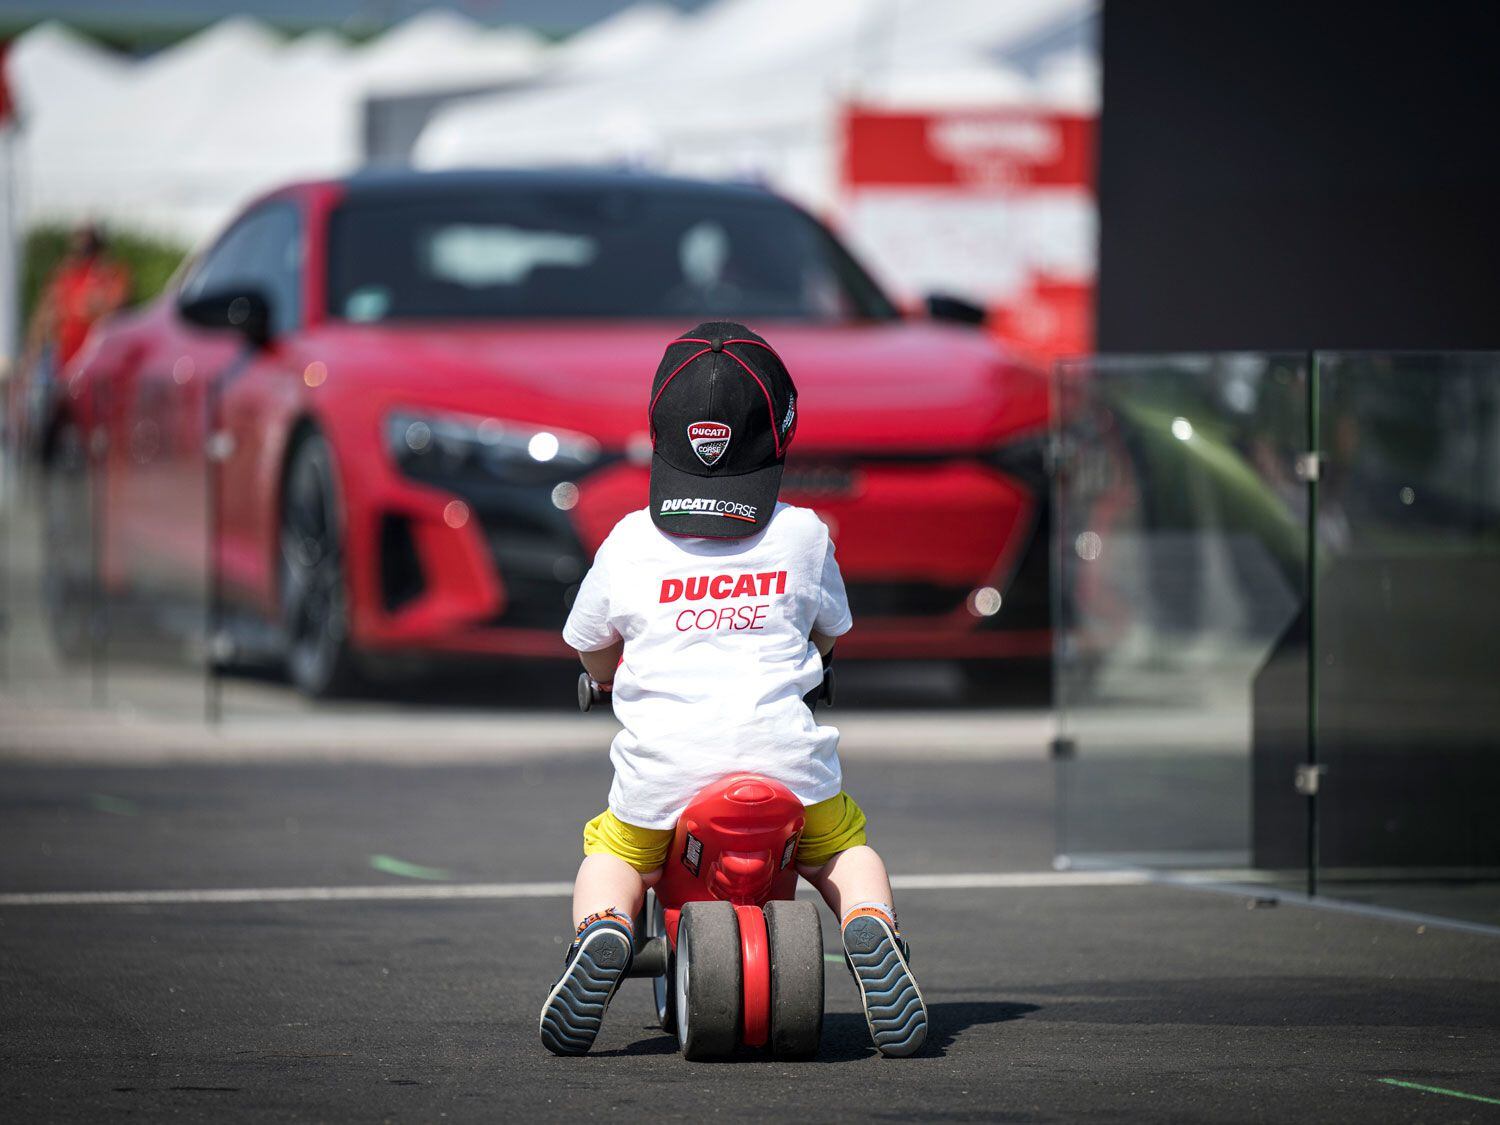 The World Ducati Week is a family-friendly celebration that lets Ducati motorcycle enthusiasts share their love for all things Ducati.